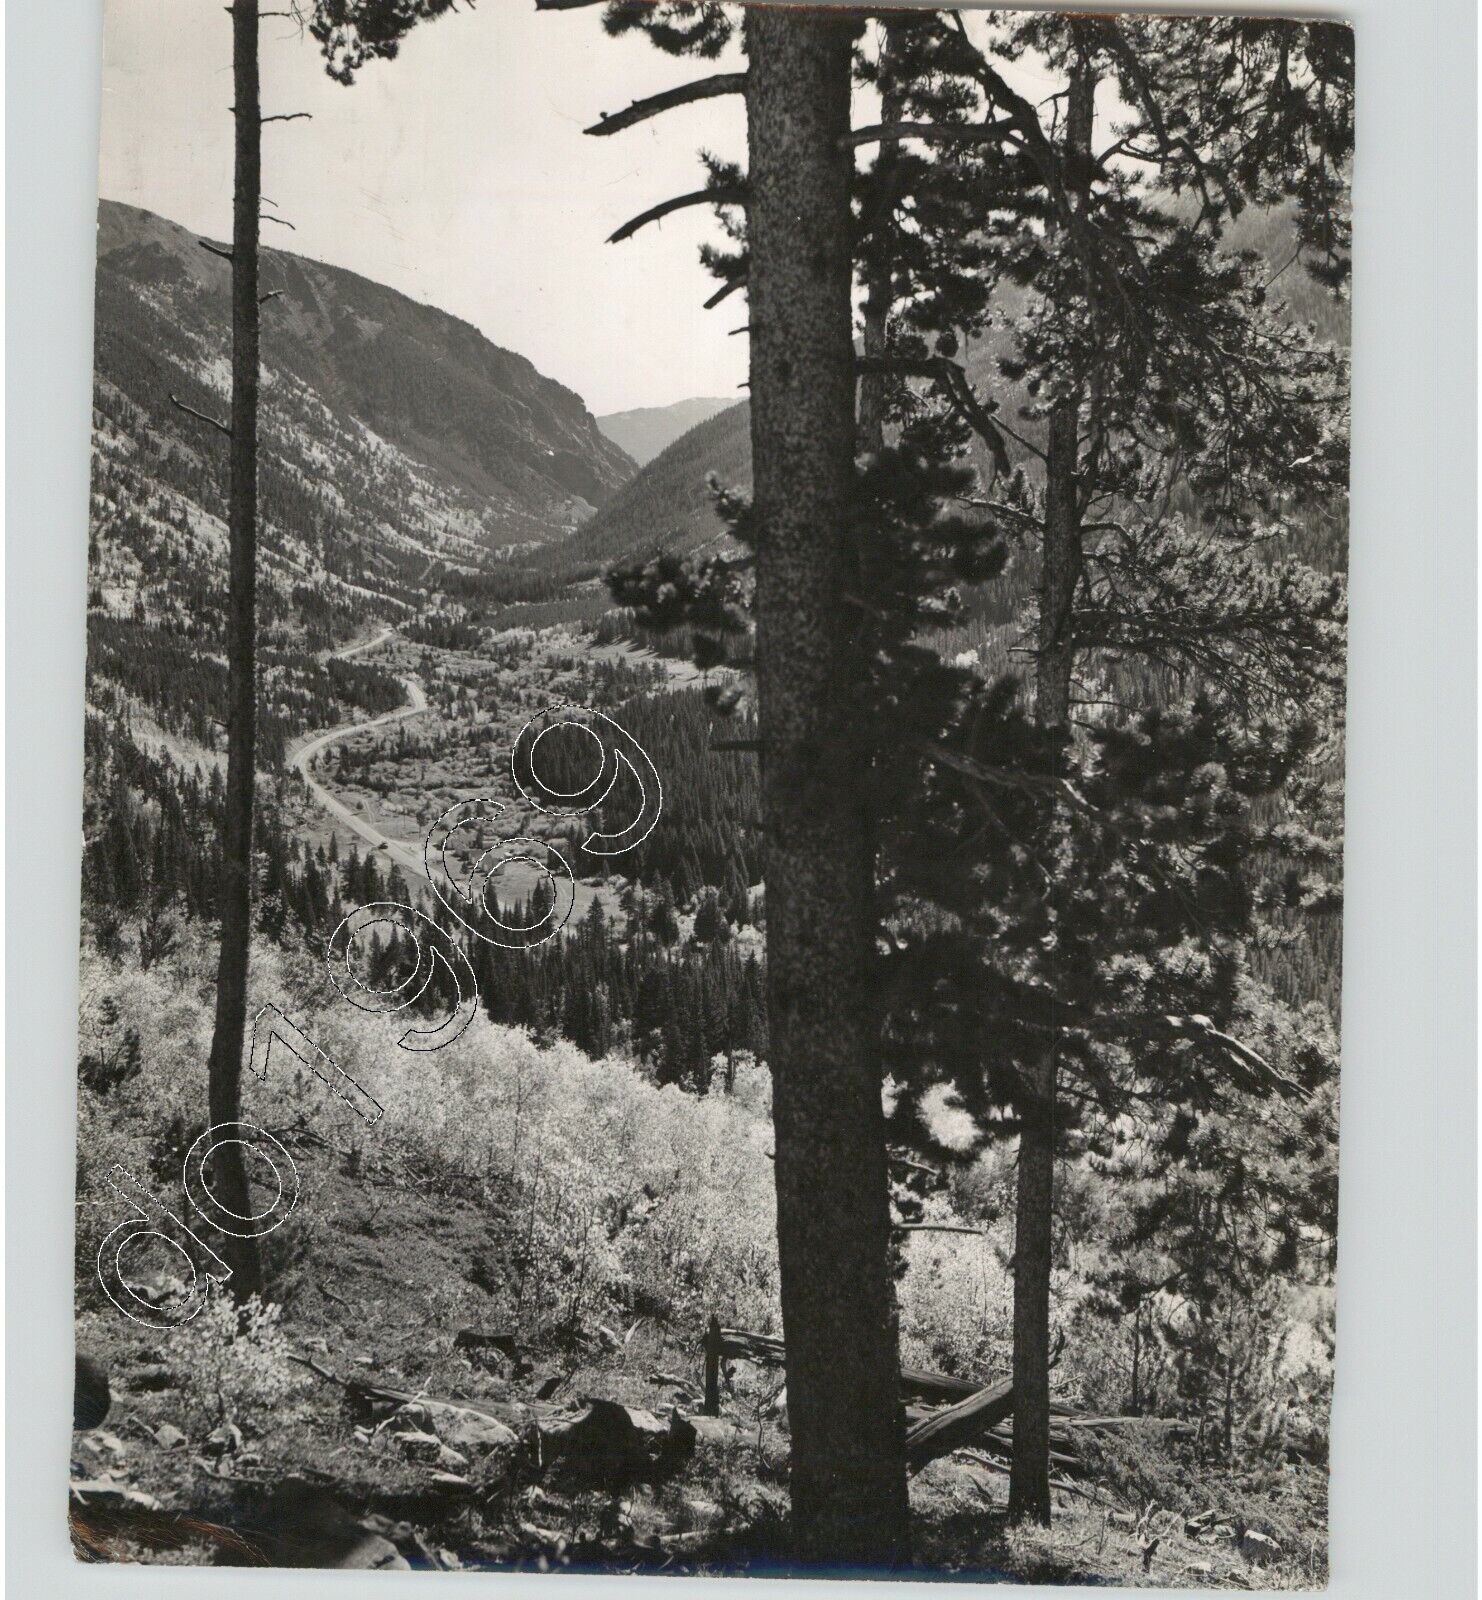 Mountainside View of Winding Road in COLORADO American West 1950s Press Photo